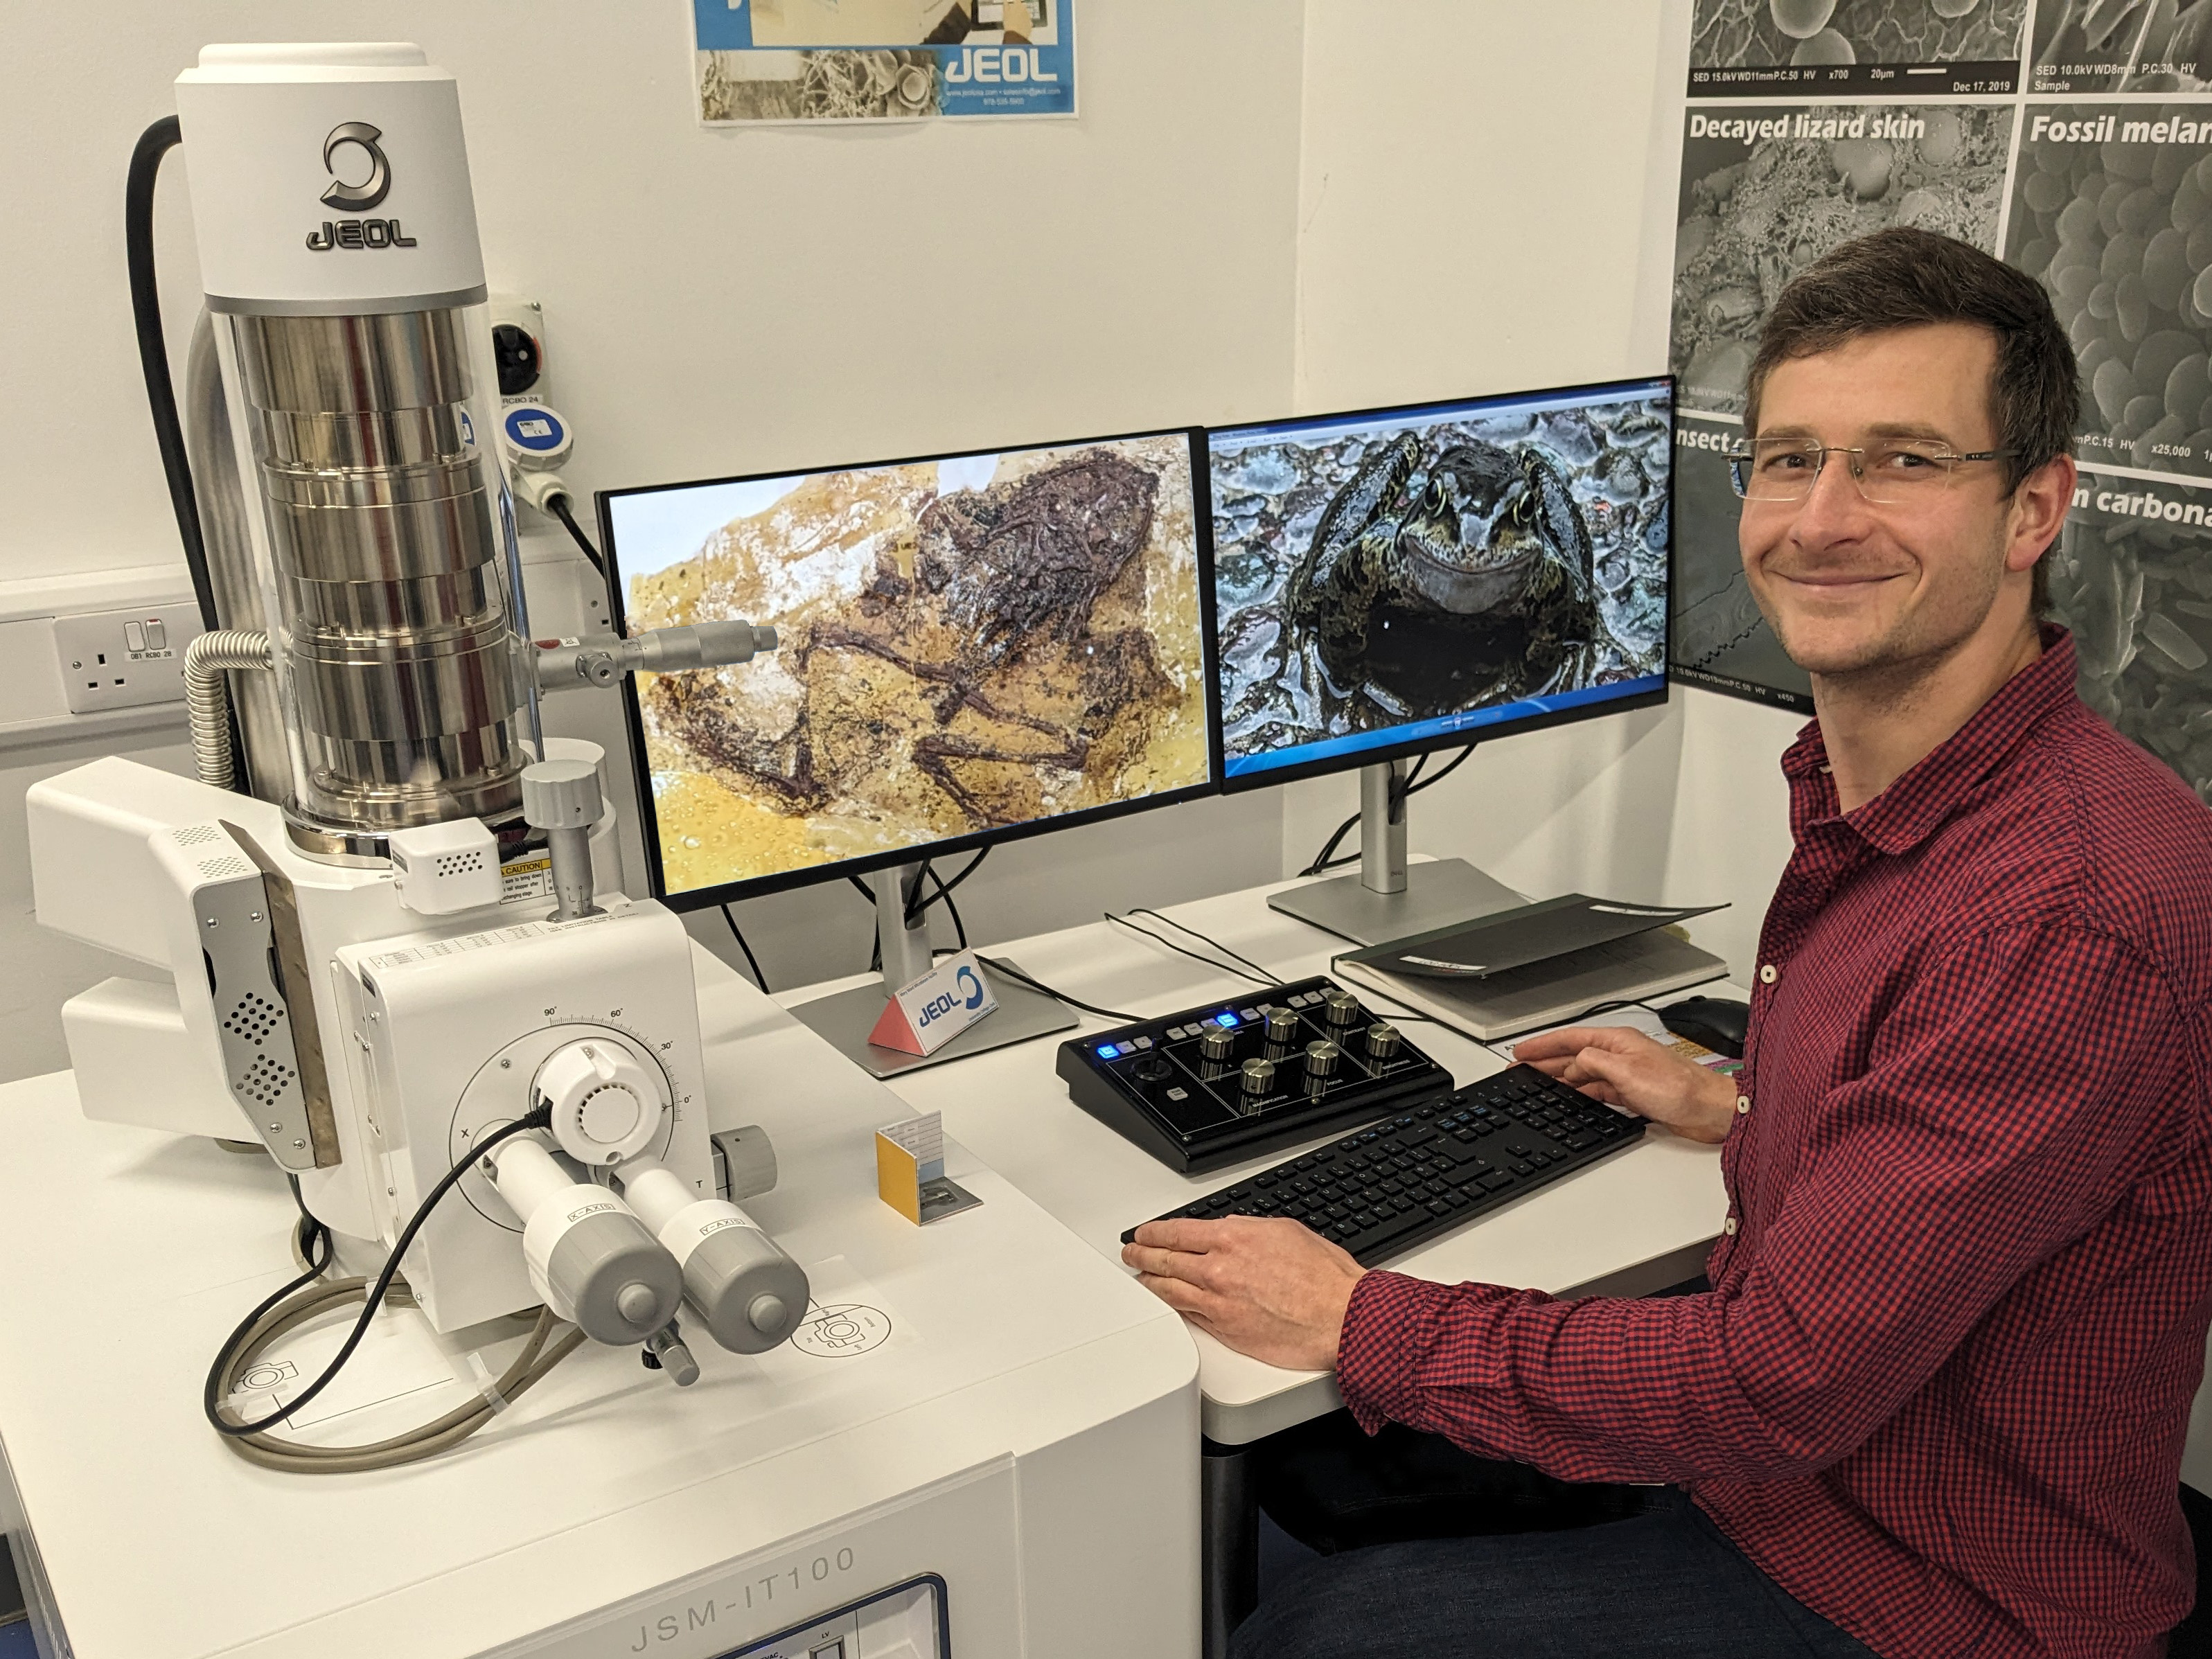 Daniel Falk examines the fossil skin samples of a Geiseltal frog with an electron microscope. Photo: D. Falk